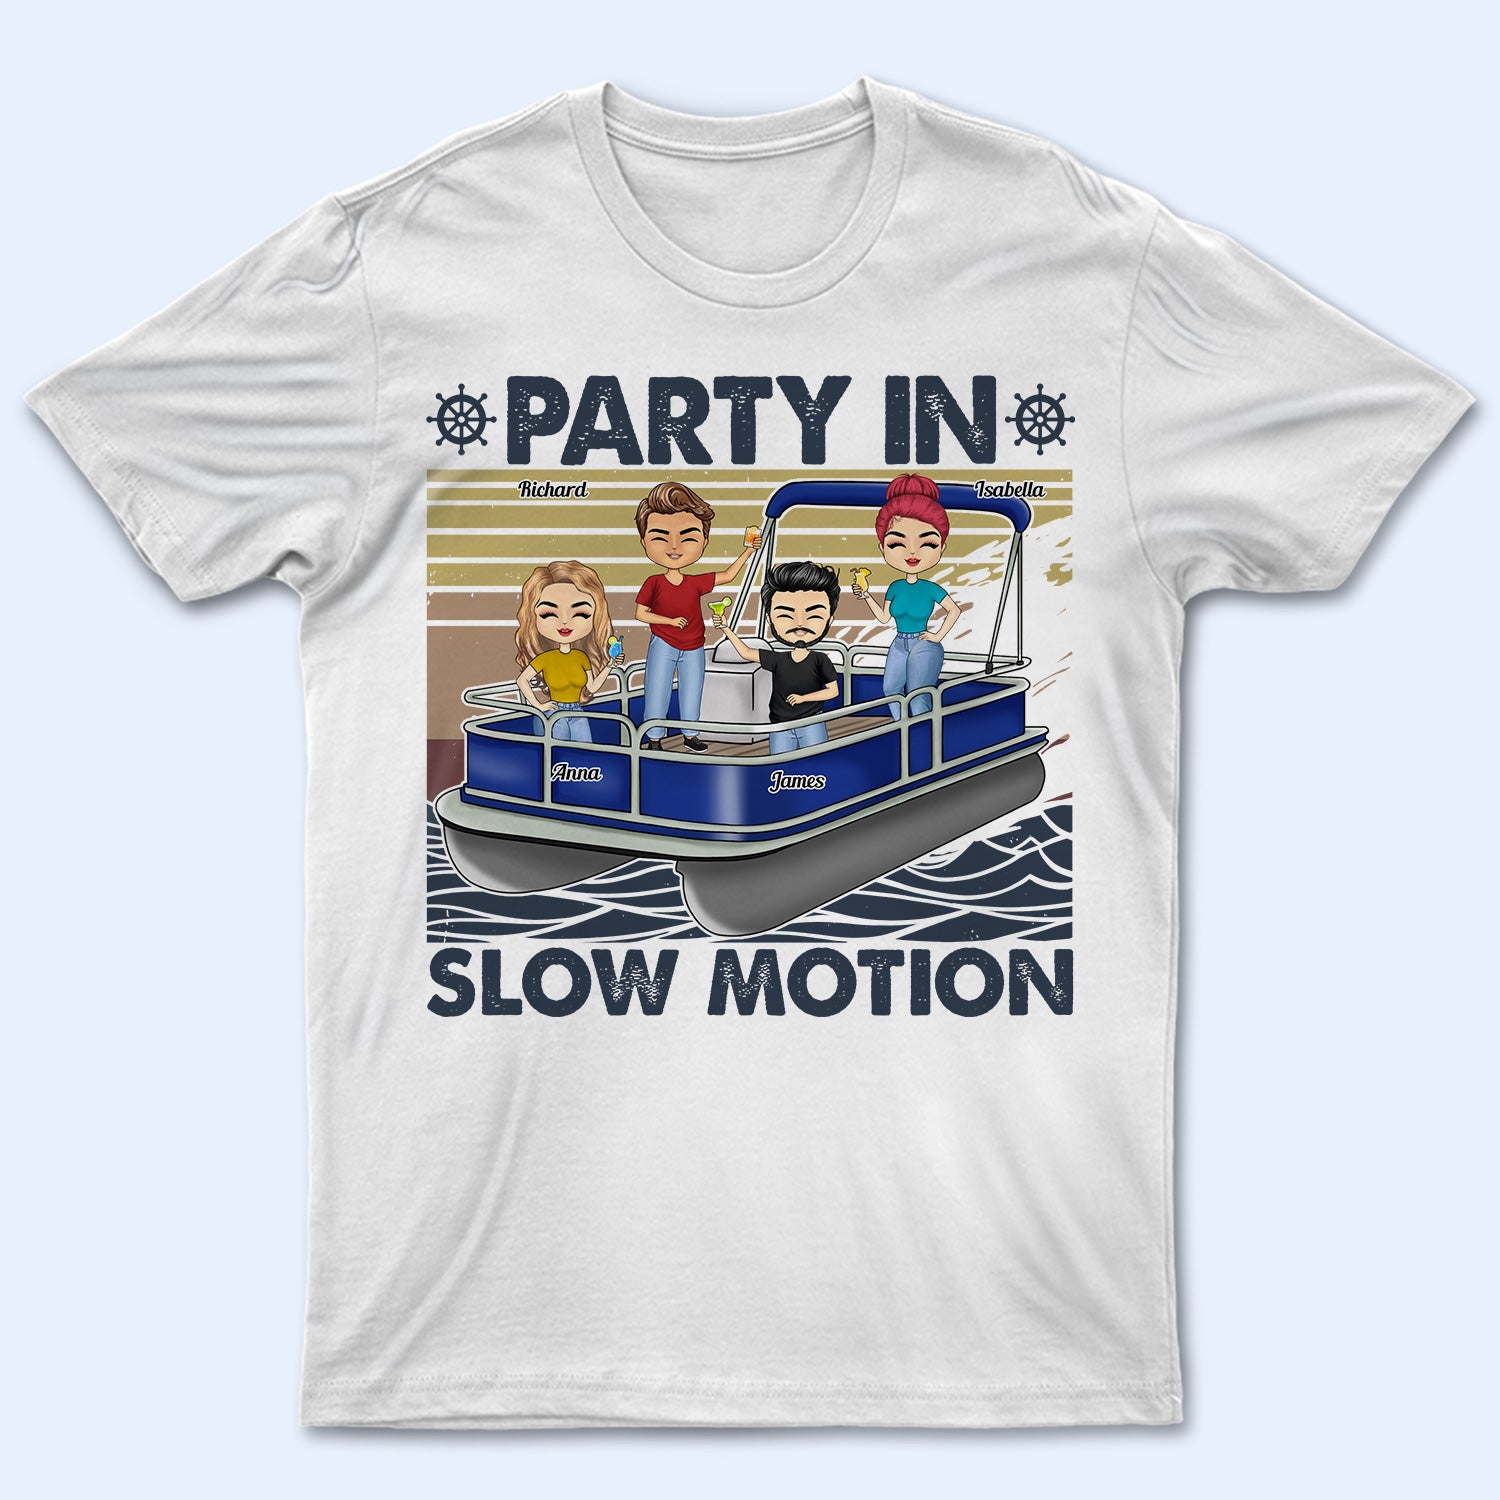 Pontoon Party In Slow Motion - Birthday, Traveling, Cruising Gift For Family, Besties, BFF Best Friends, Beach Lovers, Travelers - Personalized Custom T Shirt